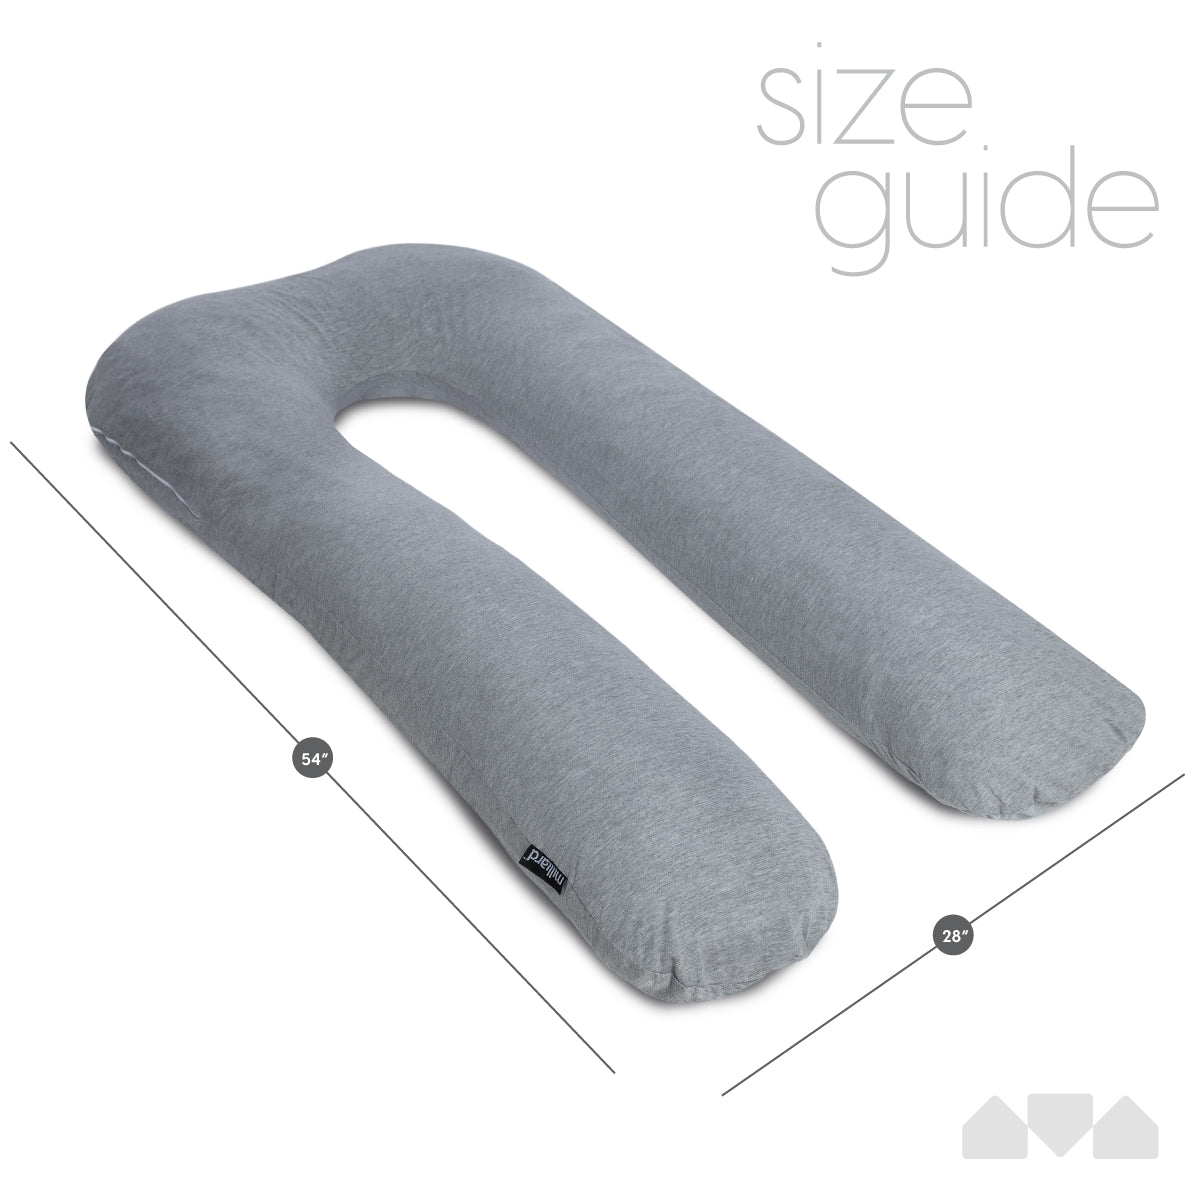 54 Inch U-Shaped Memory Foam Body Pillow with Breathable Cover - Milliard Brands